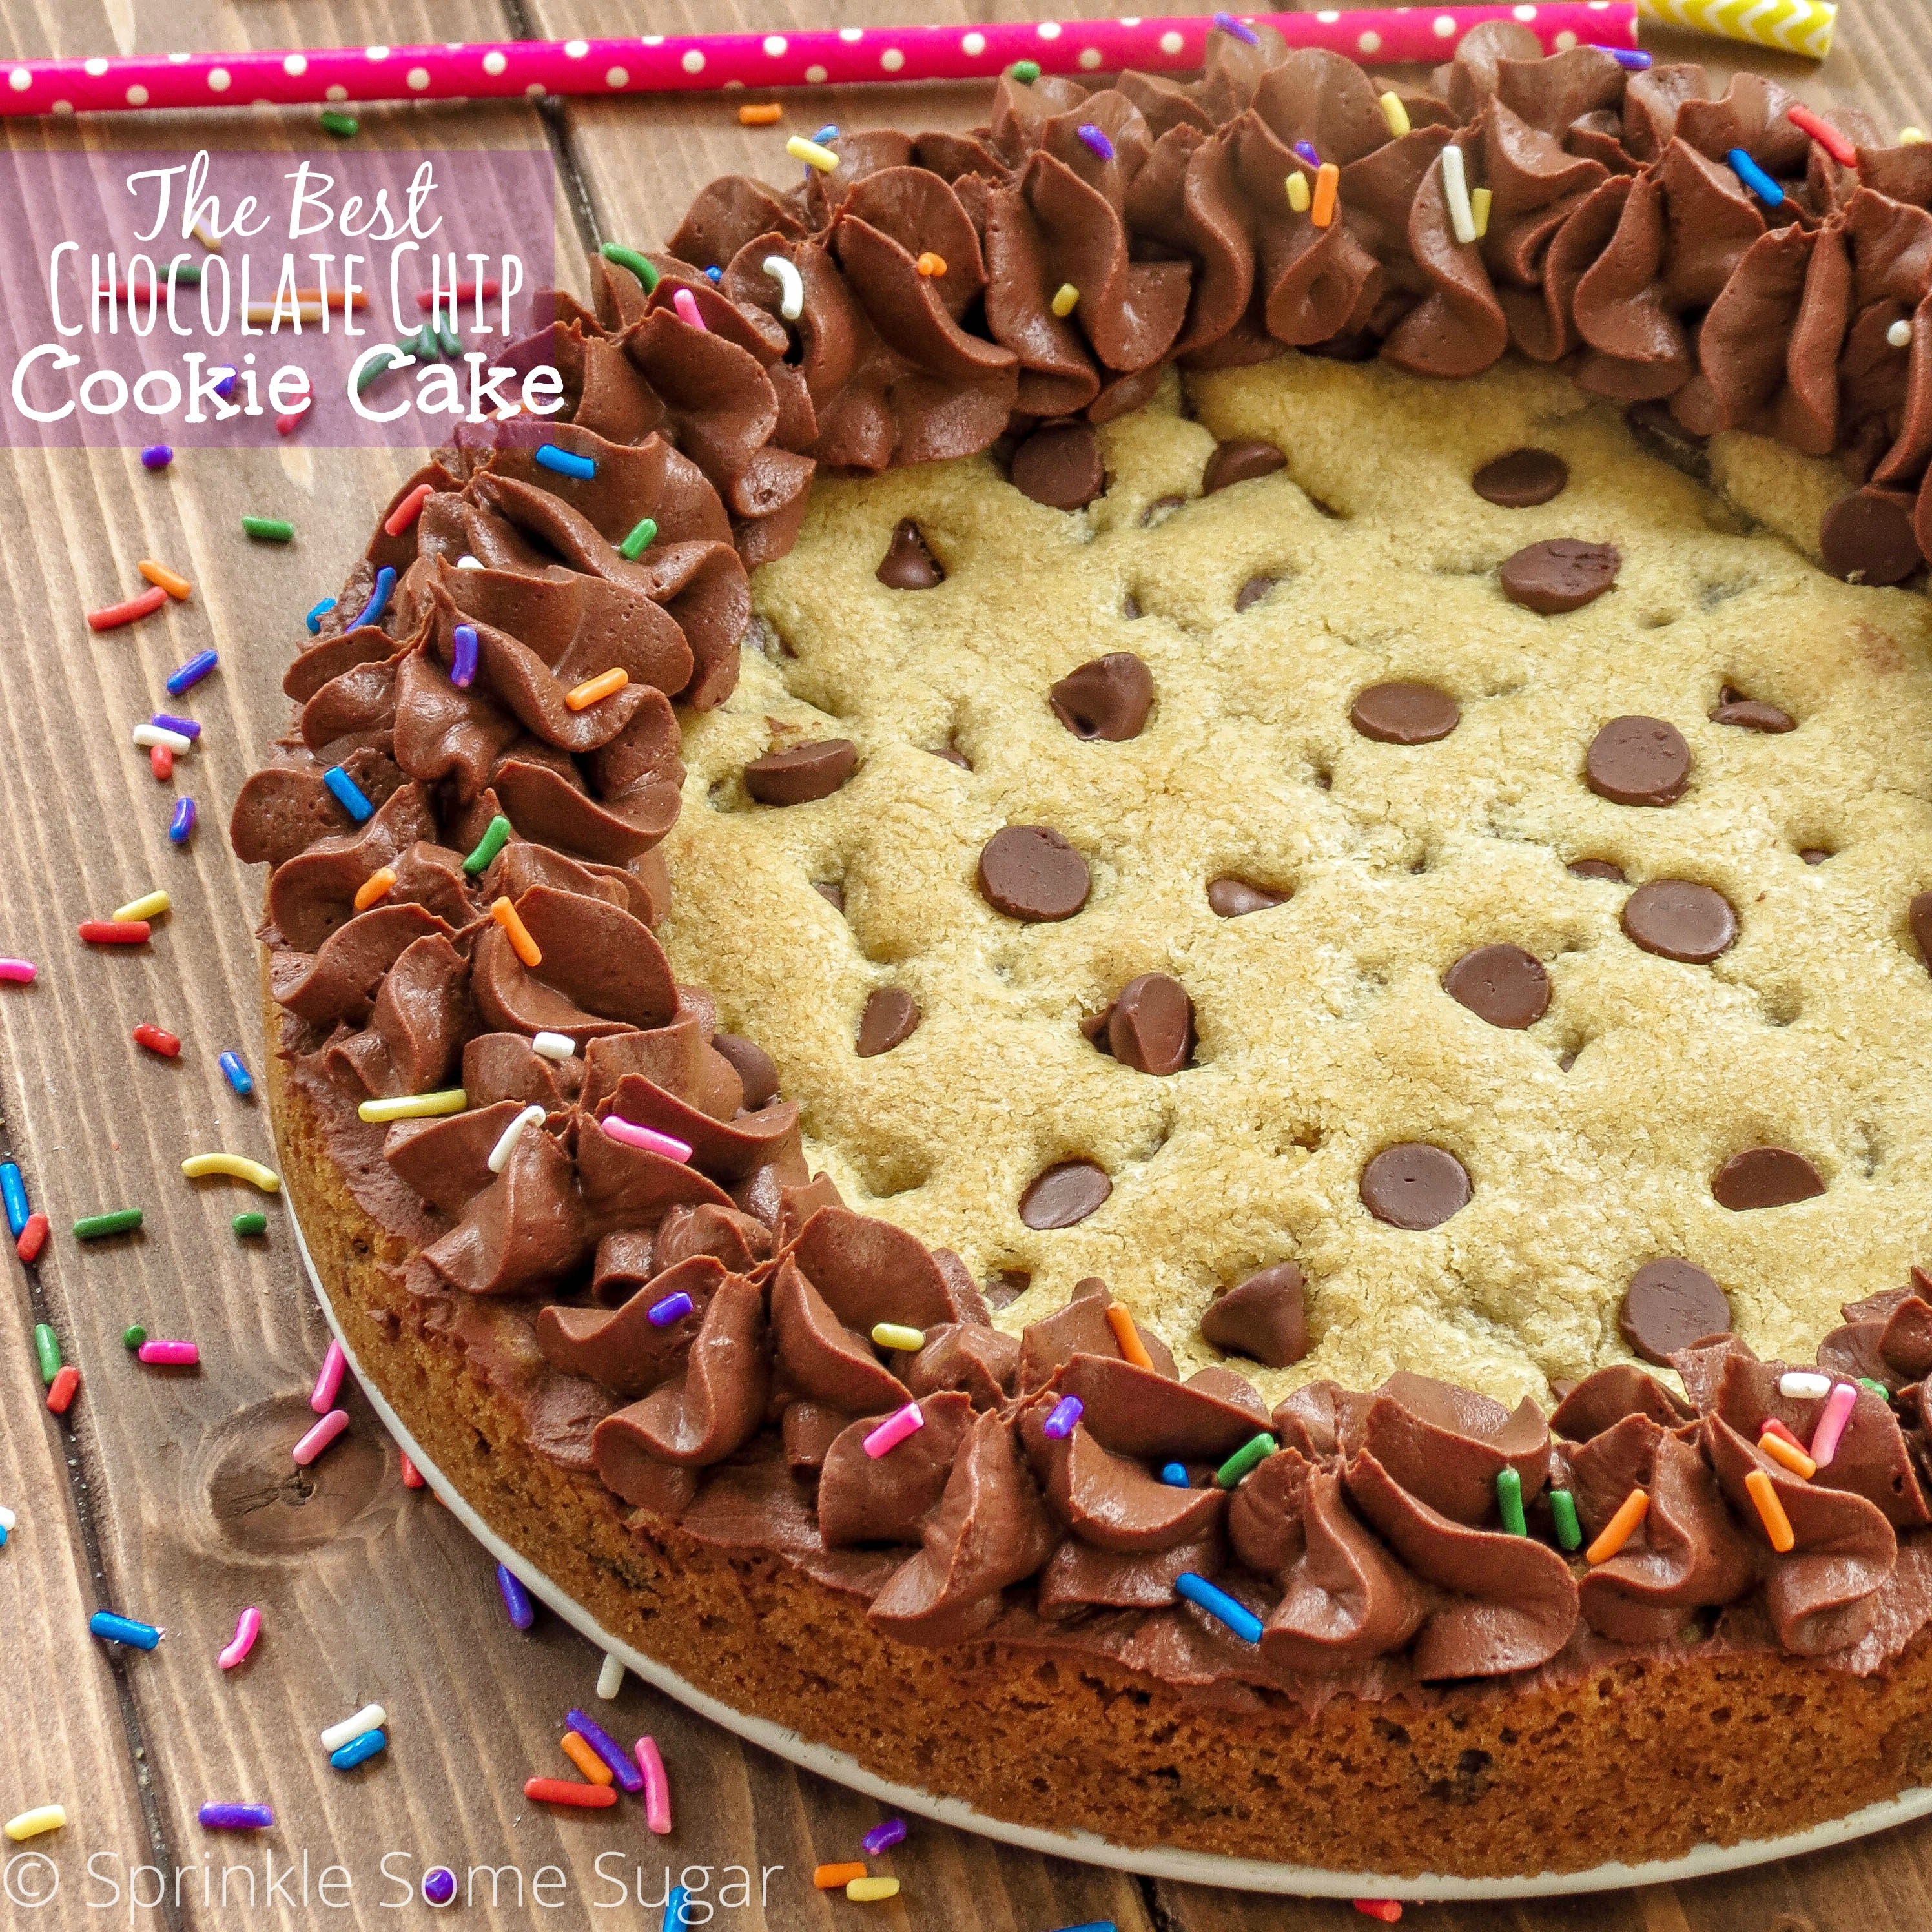 Chocolate Chip Cookie Cake
 The Best Chocolate Chip Cookie Cake Sprinkle Some Sugar